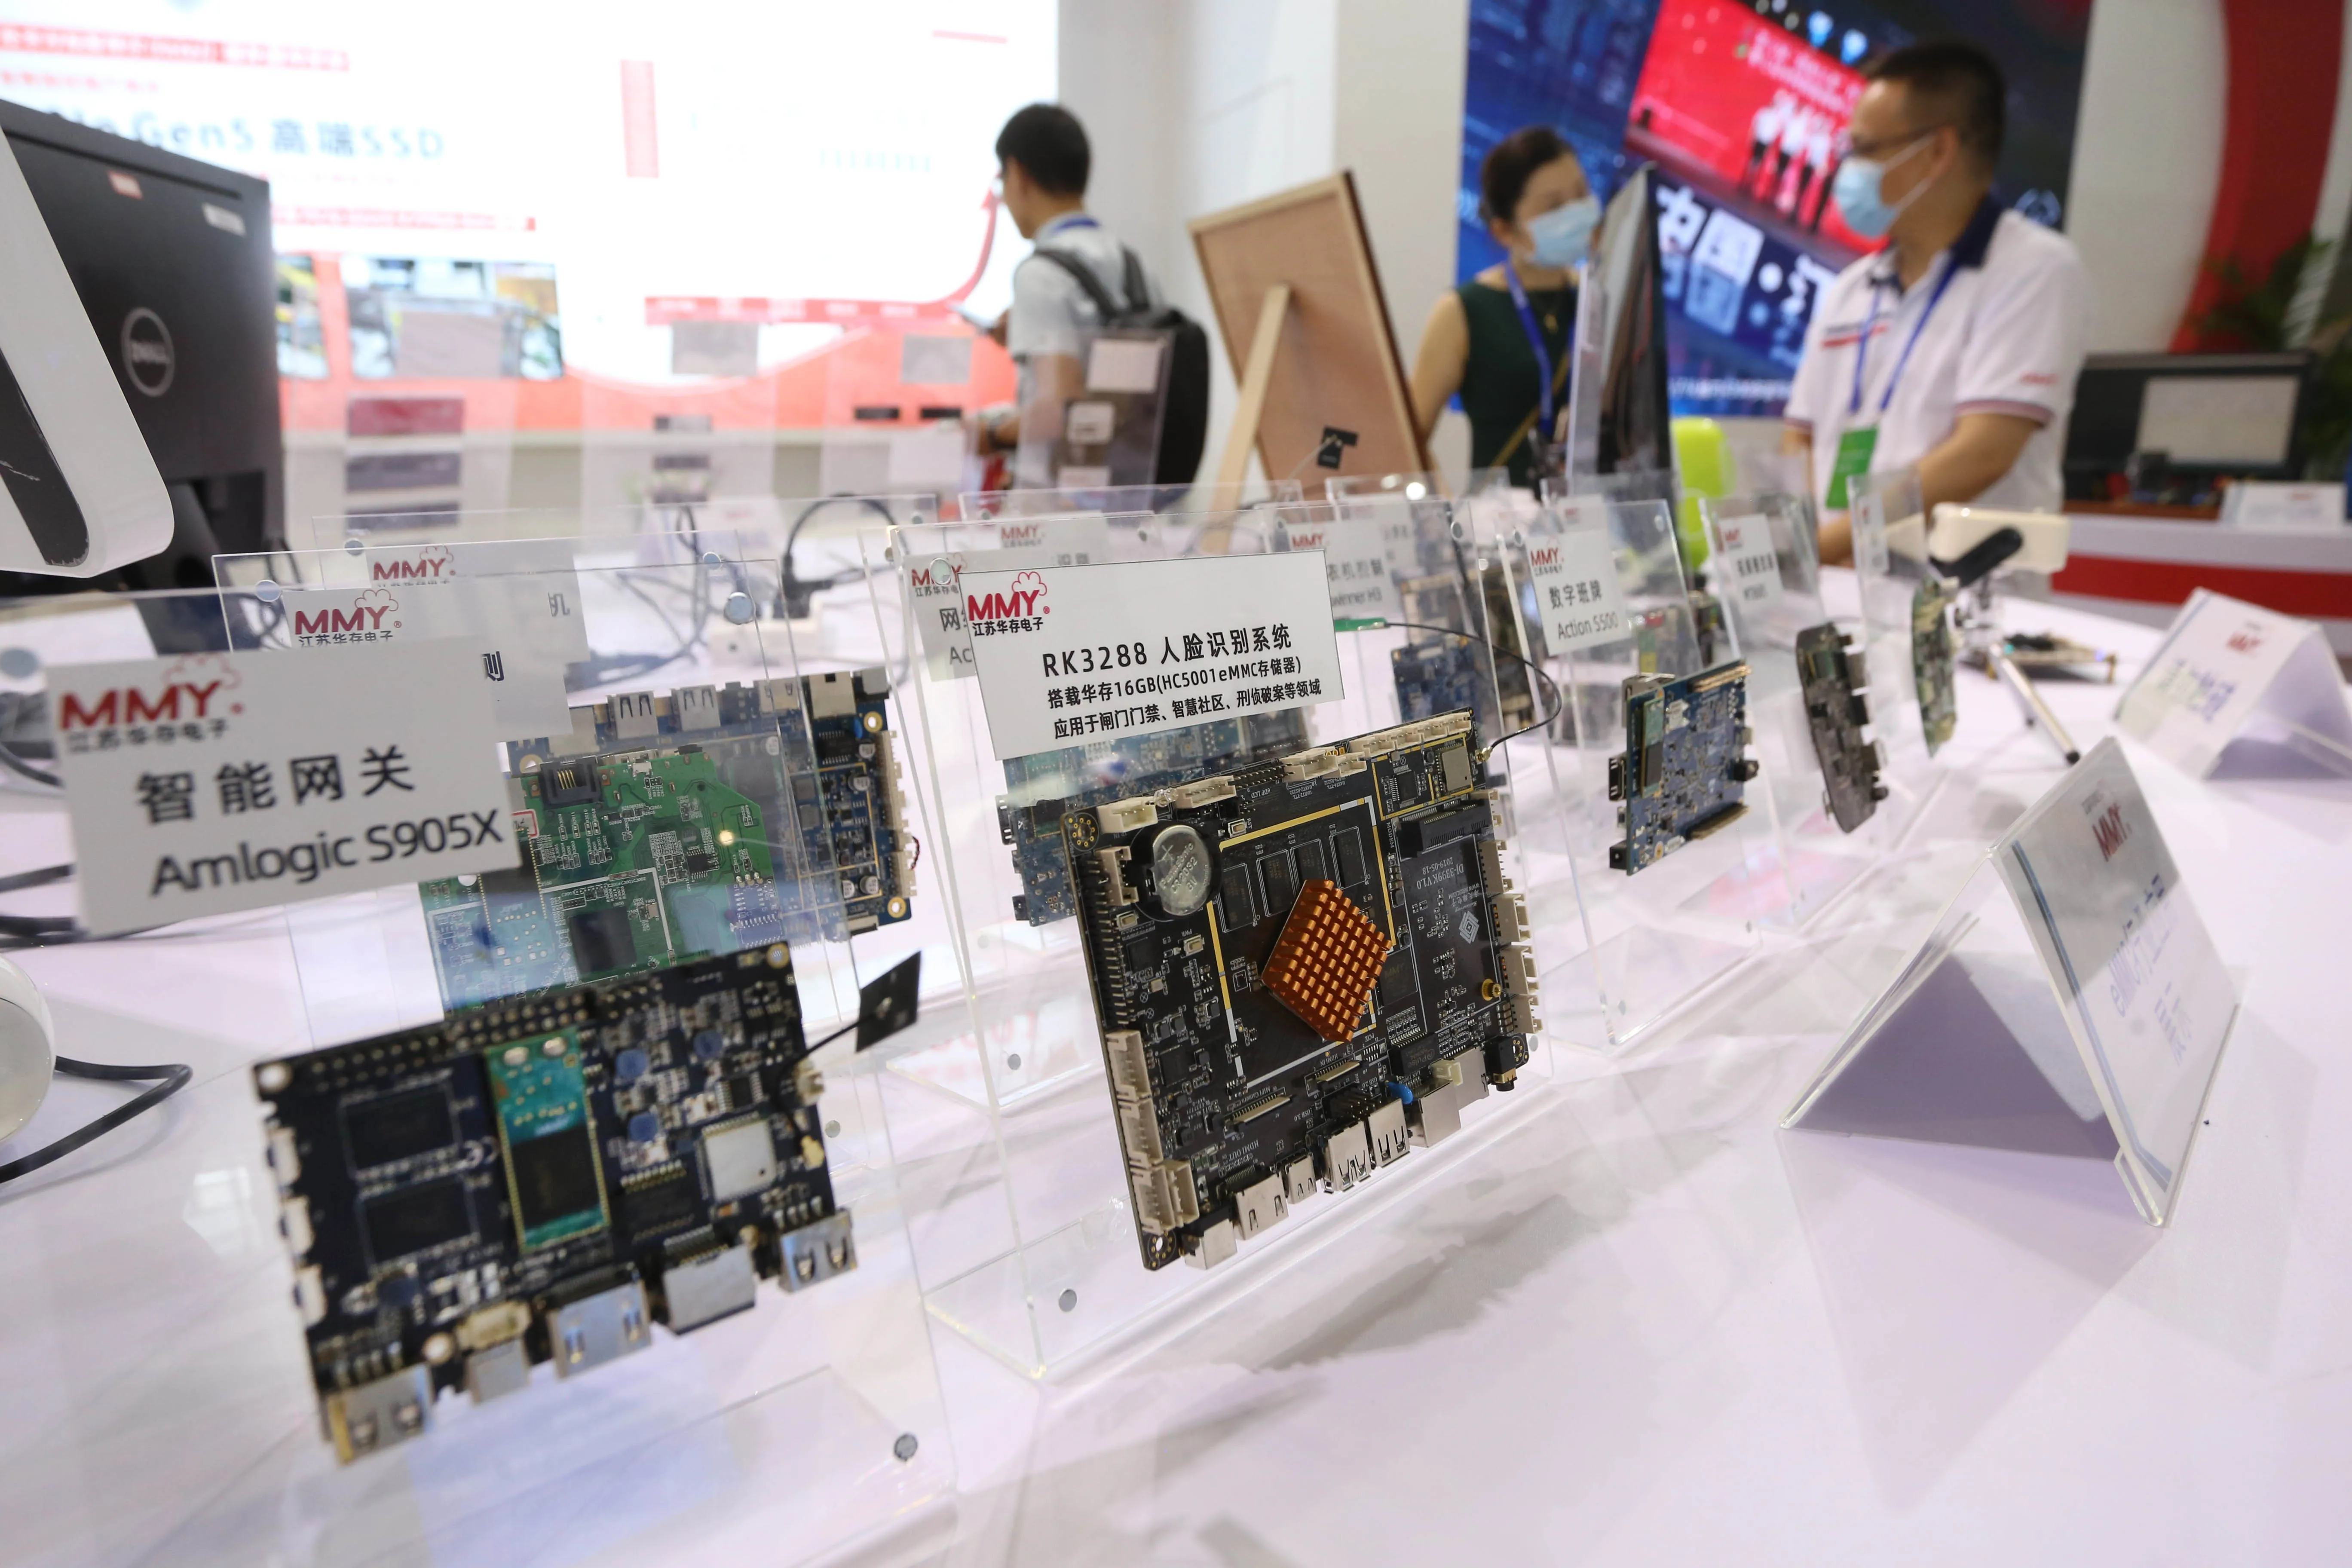 Lagging but motivated: The state of China's semiconductor industry